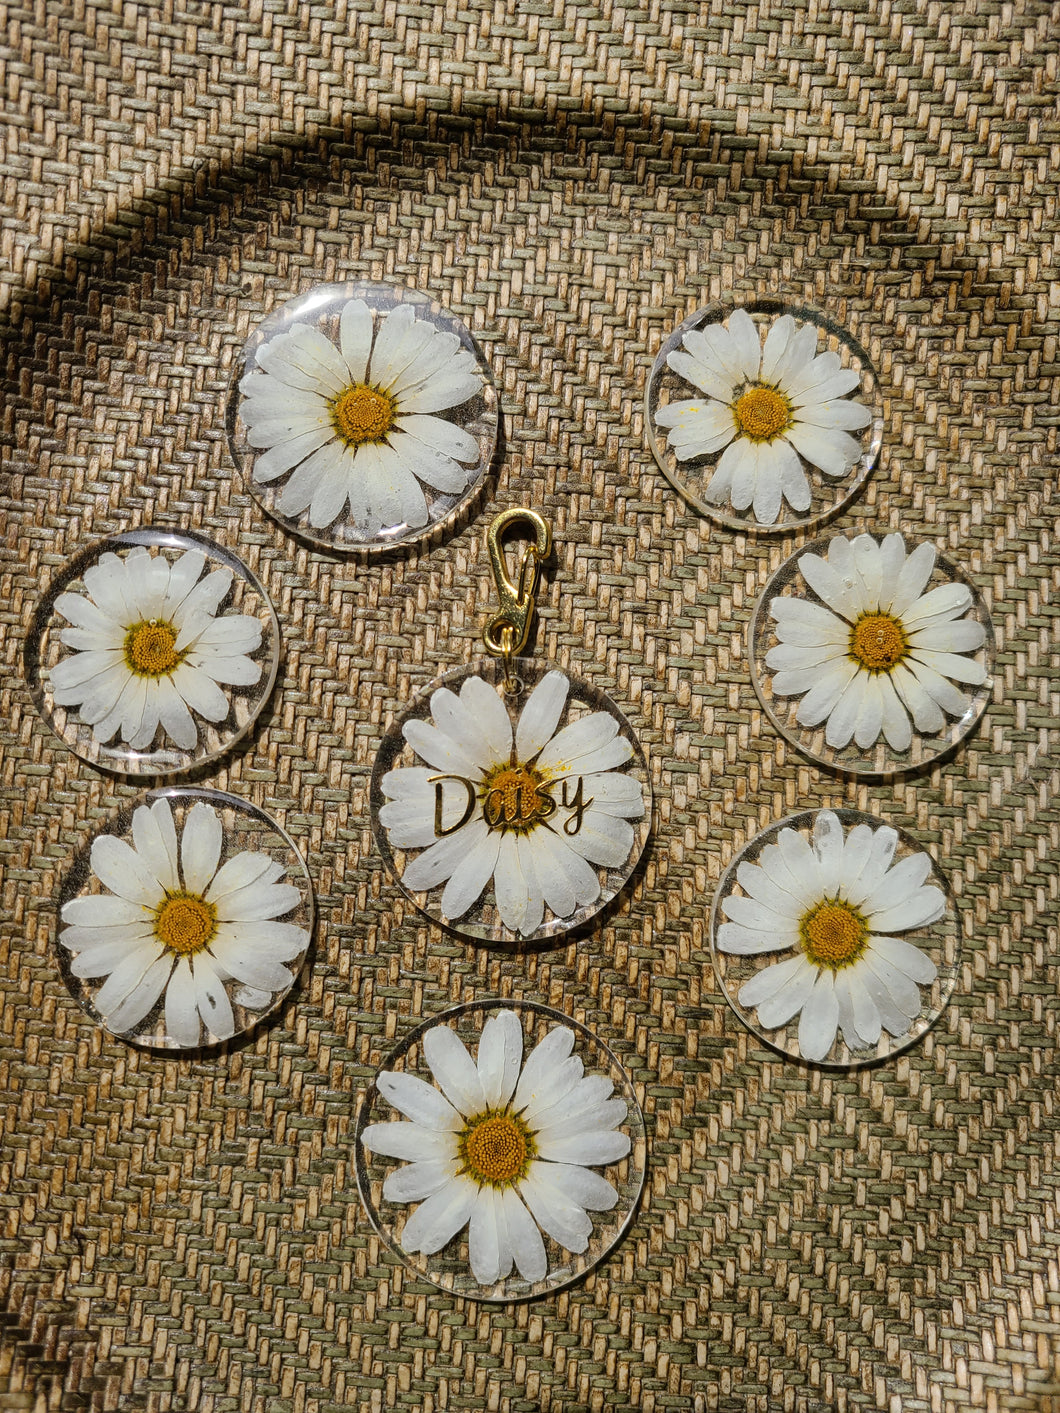 Large Dog Tag- White Daisy, 2 inches in diameter